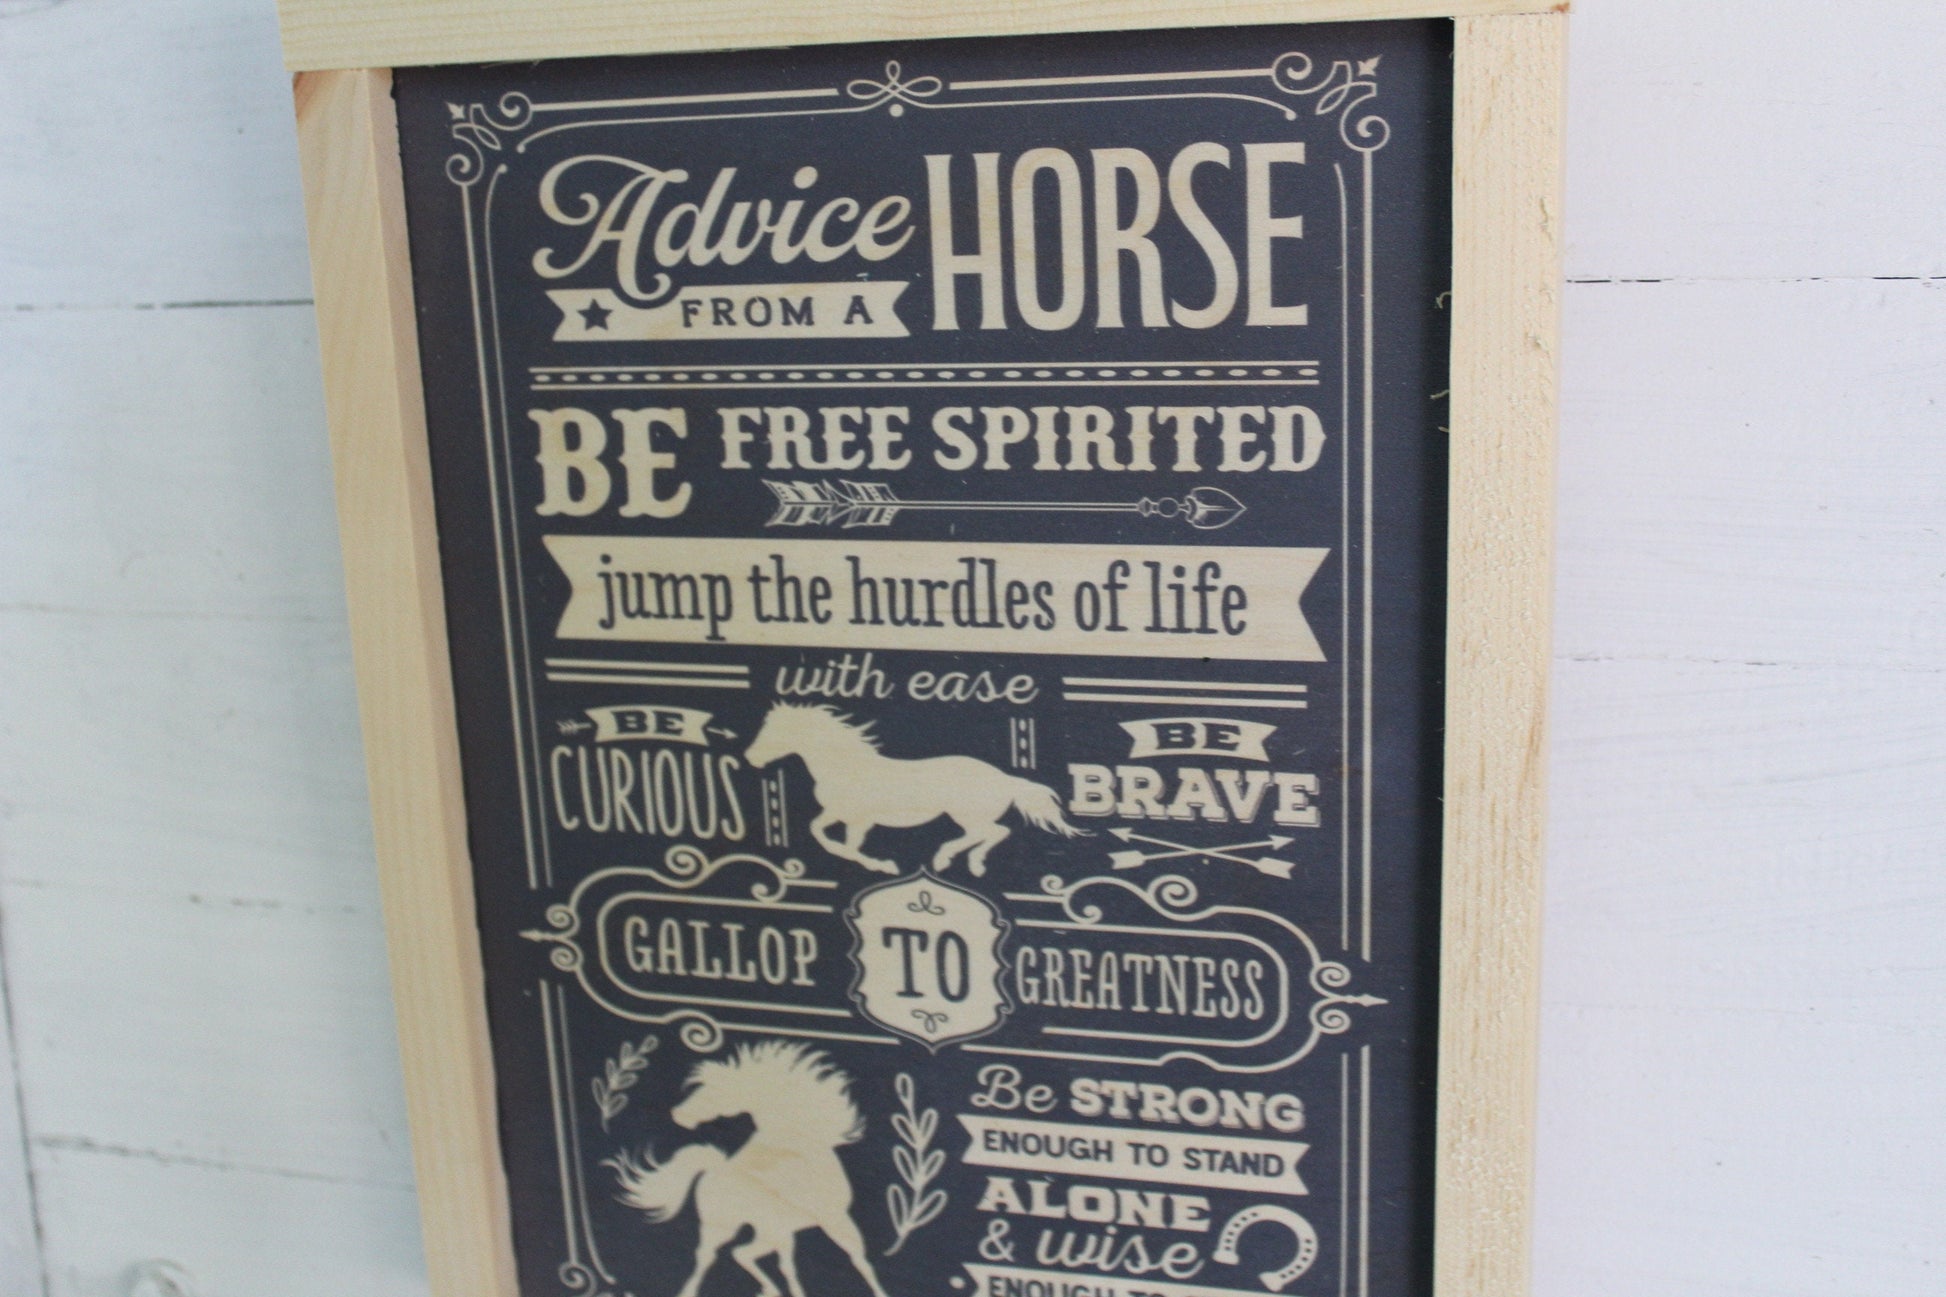 Horse Lover Gift Advice from a Horse Wood Sign Free Spirited Curious Brave Primitive Wall Hanging Strong Wise Blue Rustic Barn Gallop Pony